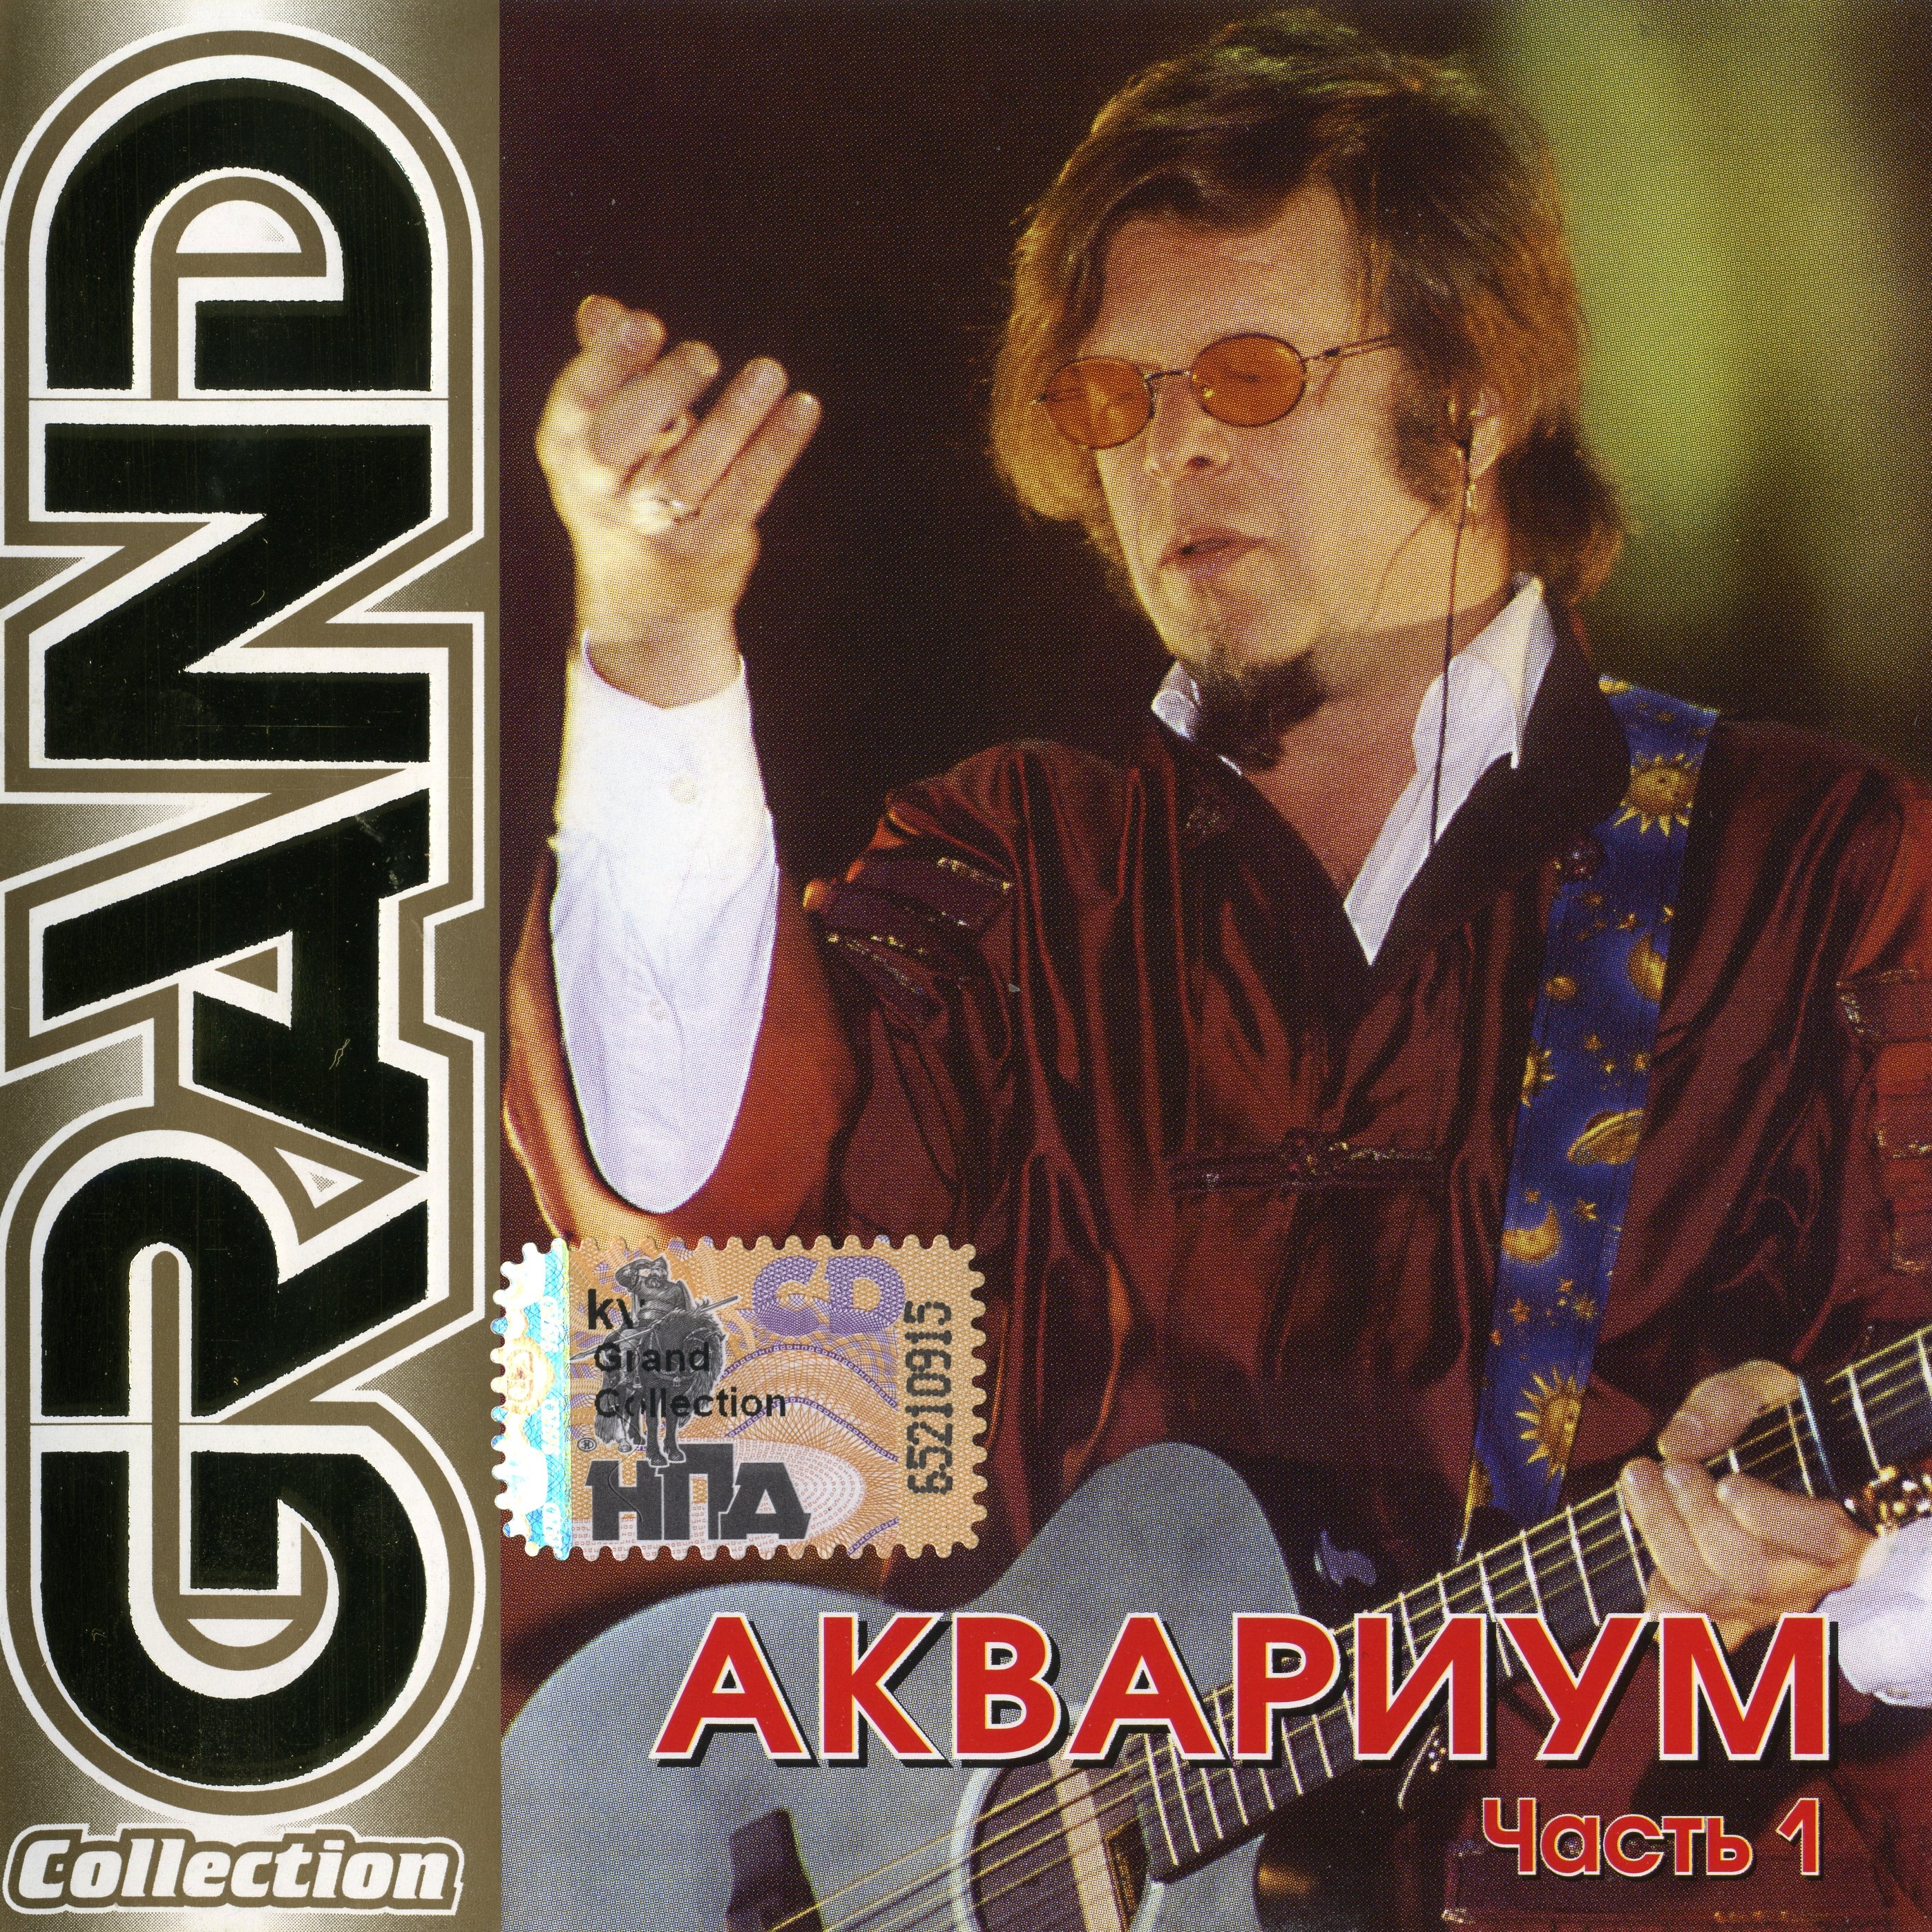 Compilations collection. Grand collection. Grand collection CD. Grand collection сборники. Аквариум 2008.